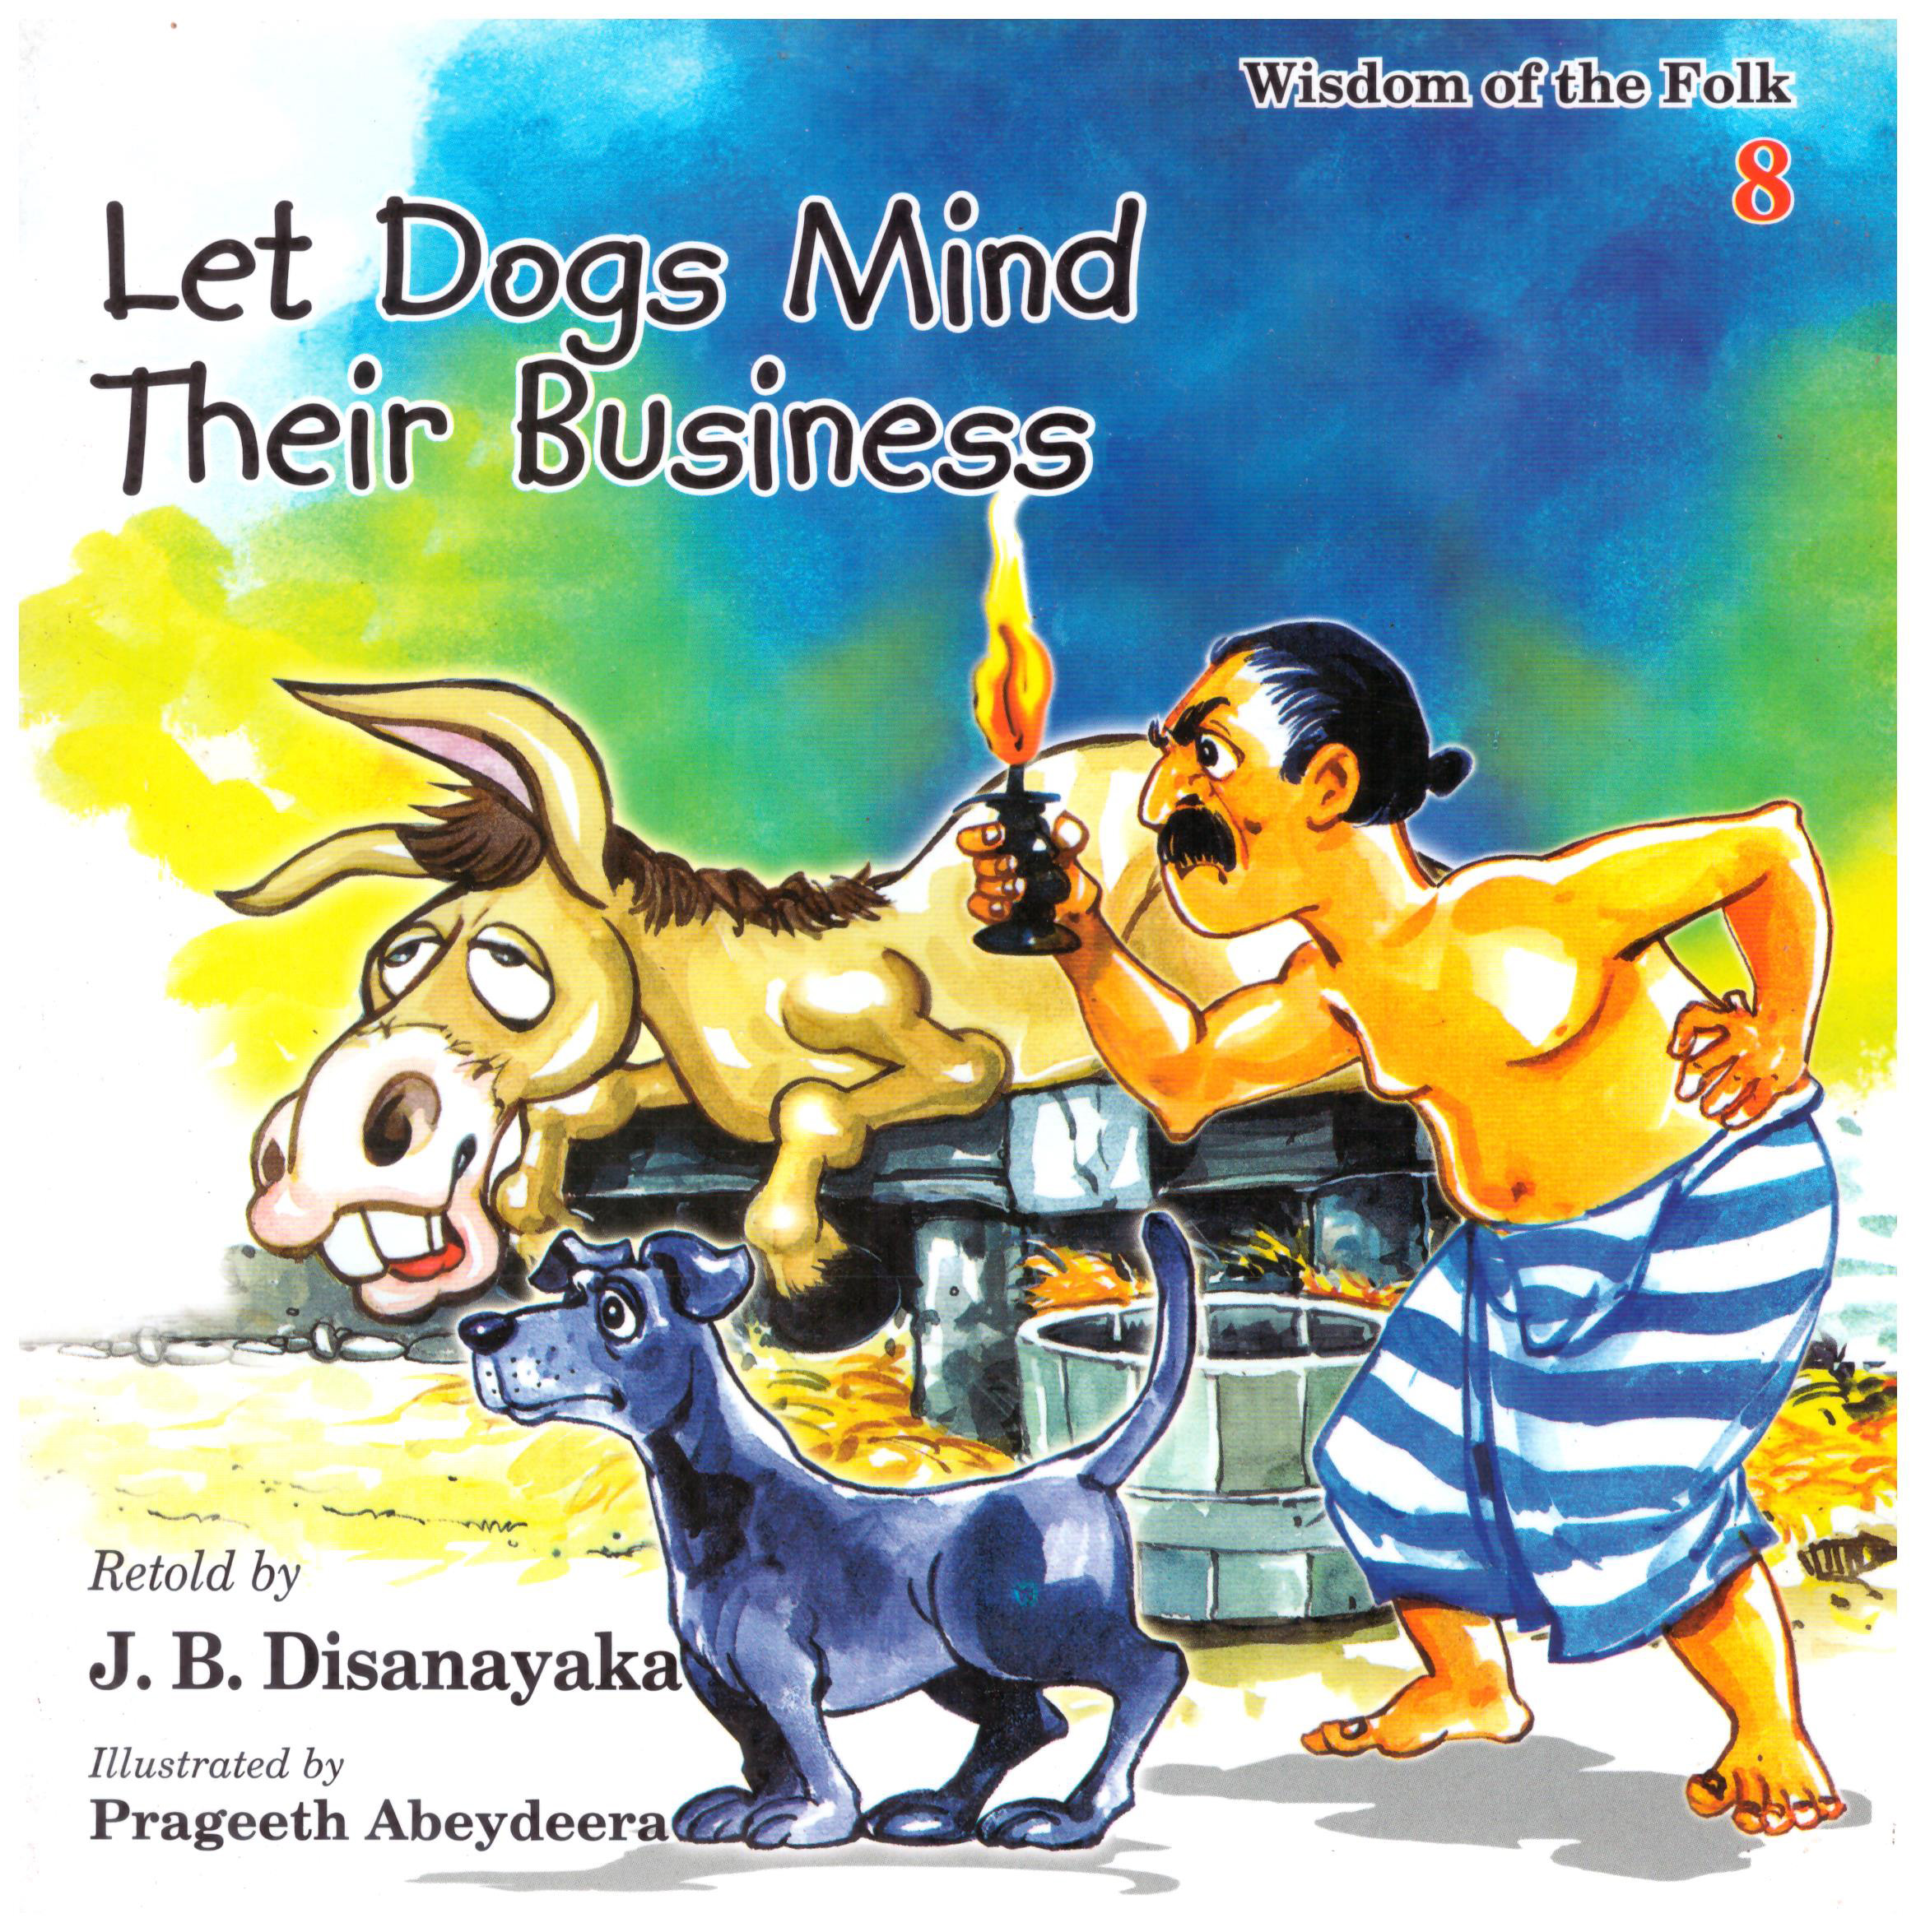 Wisdom of the Folk 8 - Let Dogs Mind Their Business 